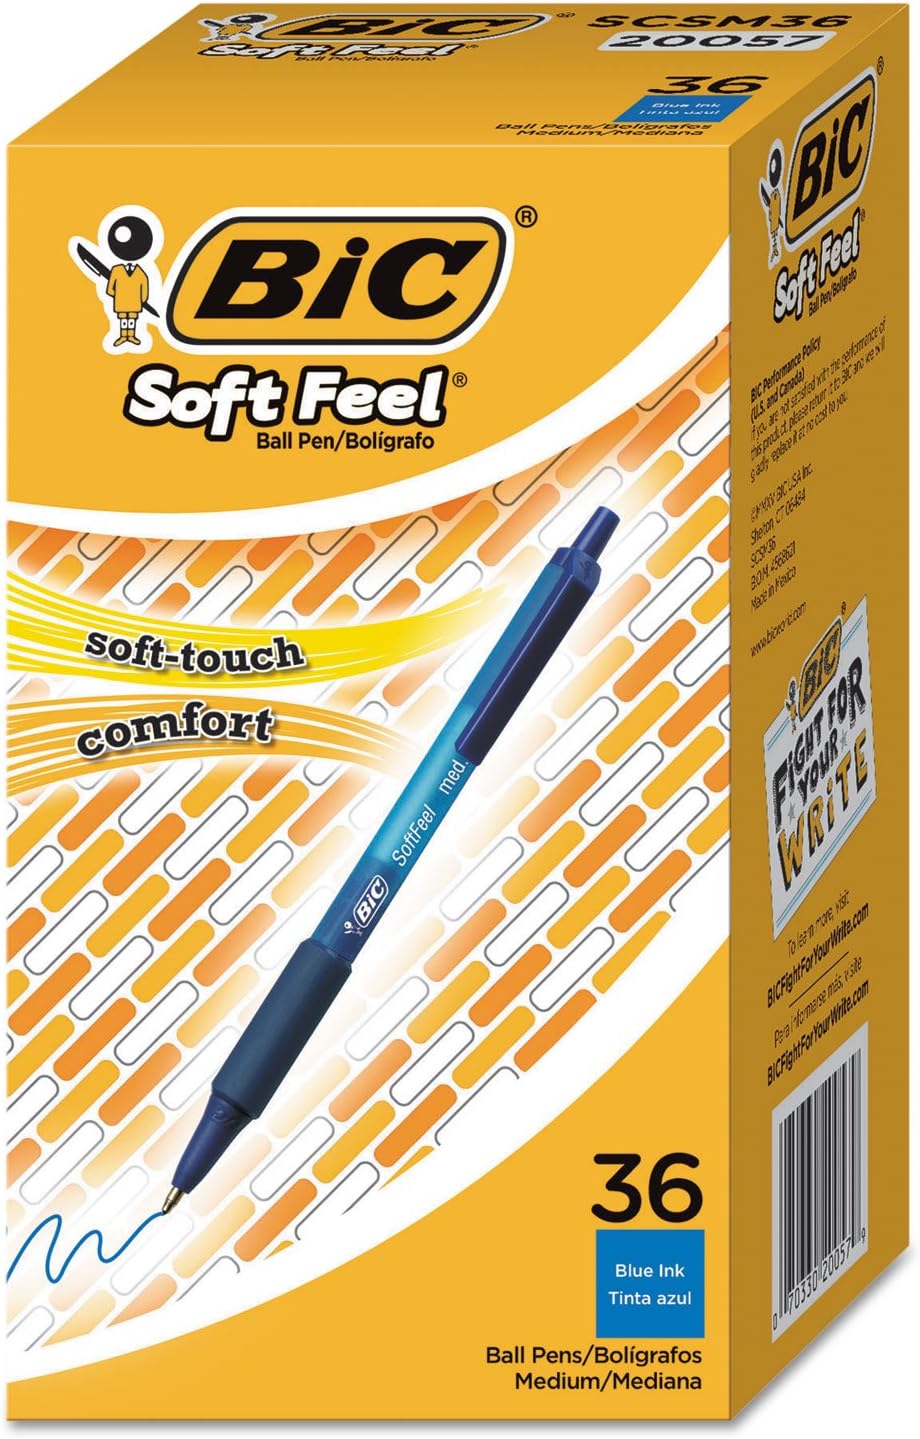 BIC Soft Feel Stick Pens With Special No-Slip Comfortable Grip, Medium Point (1.0 mm), Blue, 36-Count